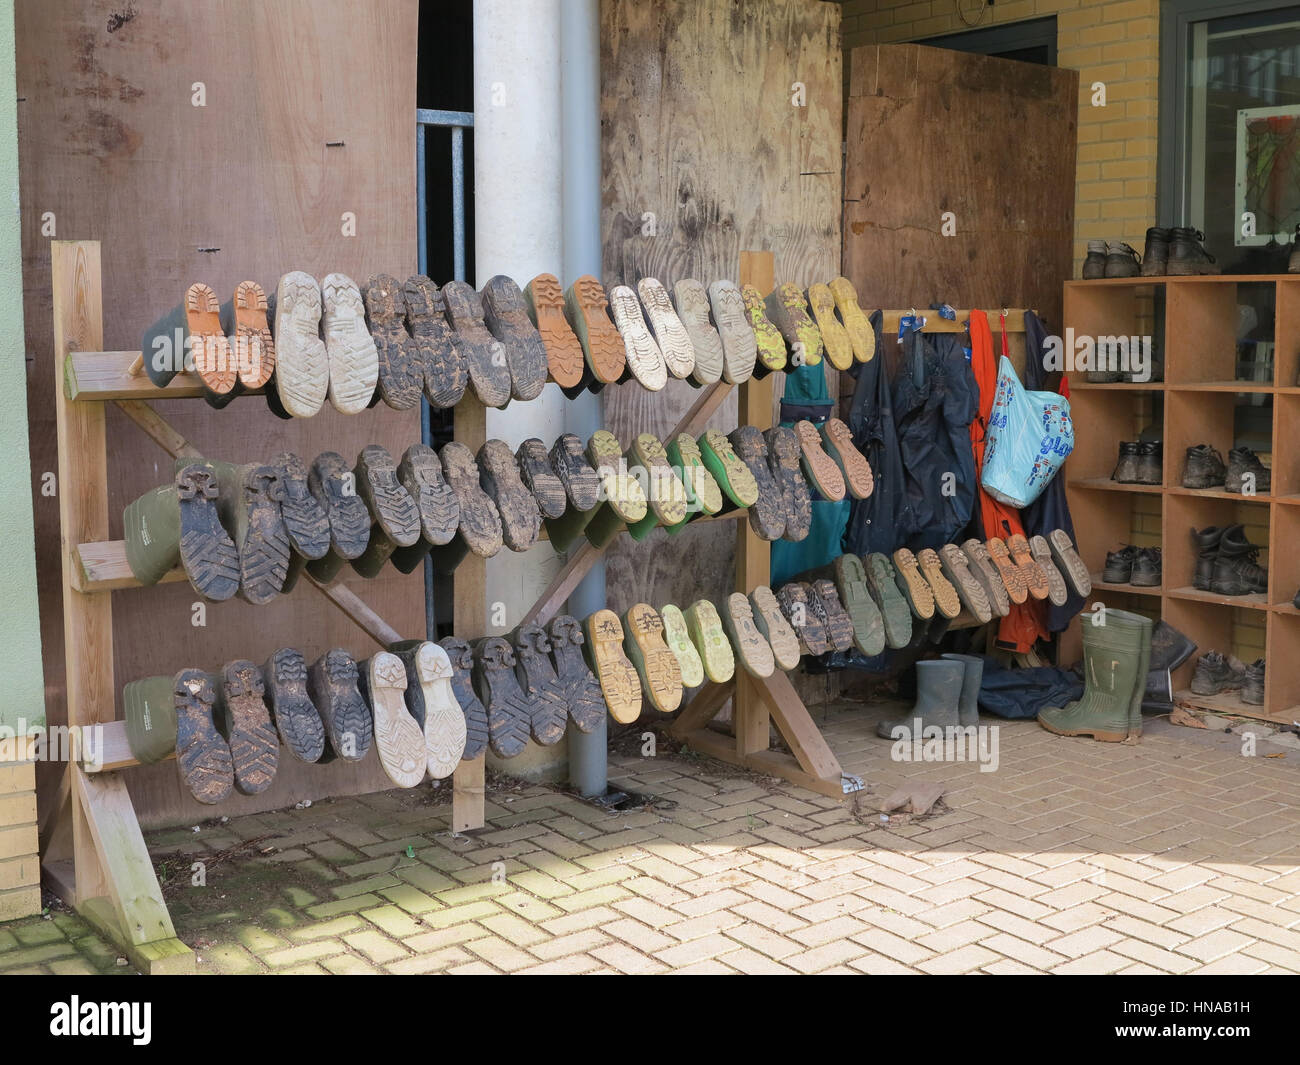 Rows of wellies and outdoor shoes belonging to a school children's gardening club Stock Photo